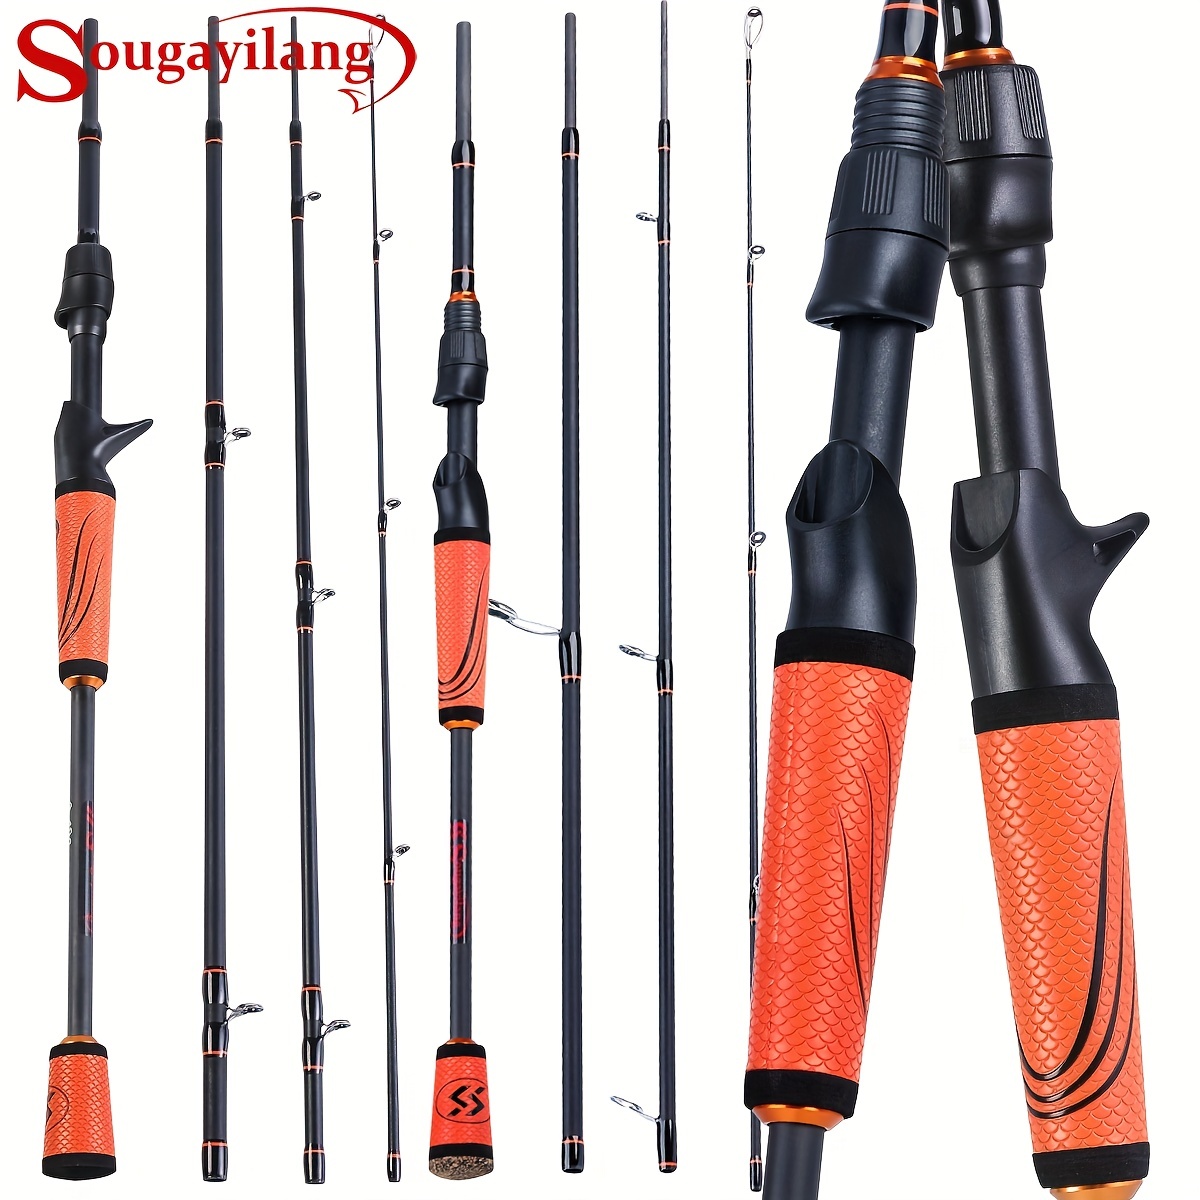 Sougayilang Ultralight Carbon Fiber Spinning/Casting Fishing Rod, Fishing  Pole With Rubber Handle For Advanced Anglers, 180cm/210cm (6ft/7ft)